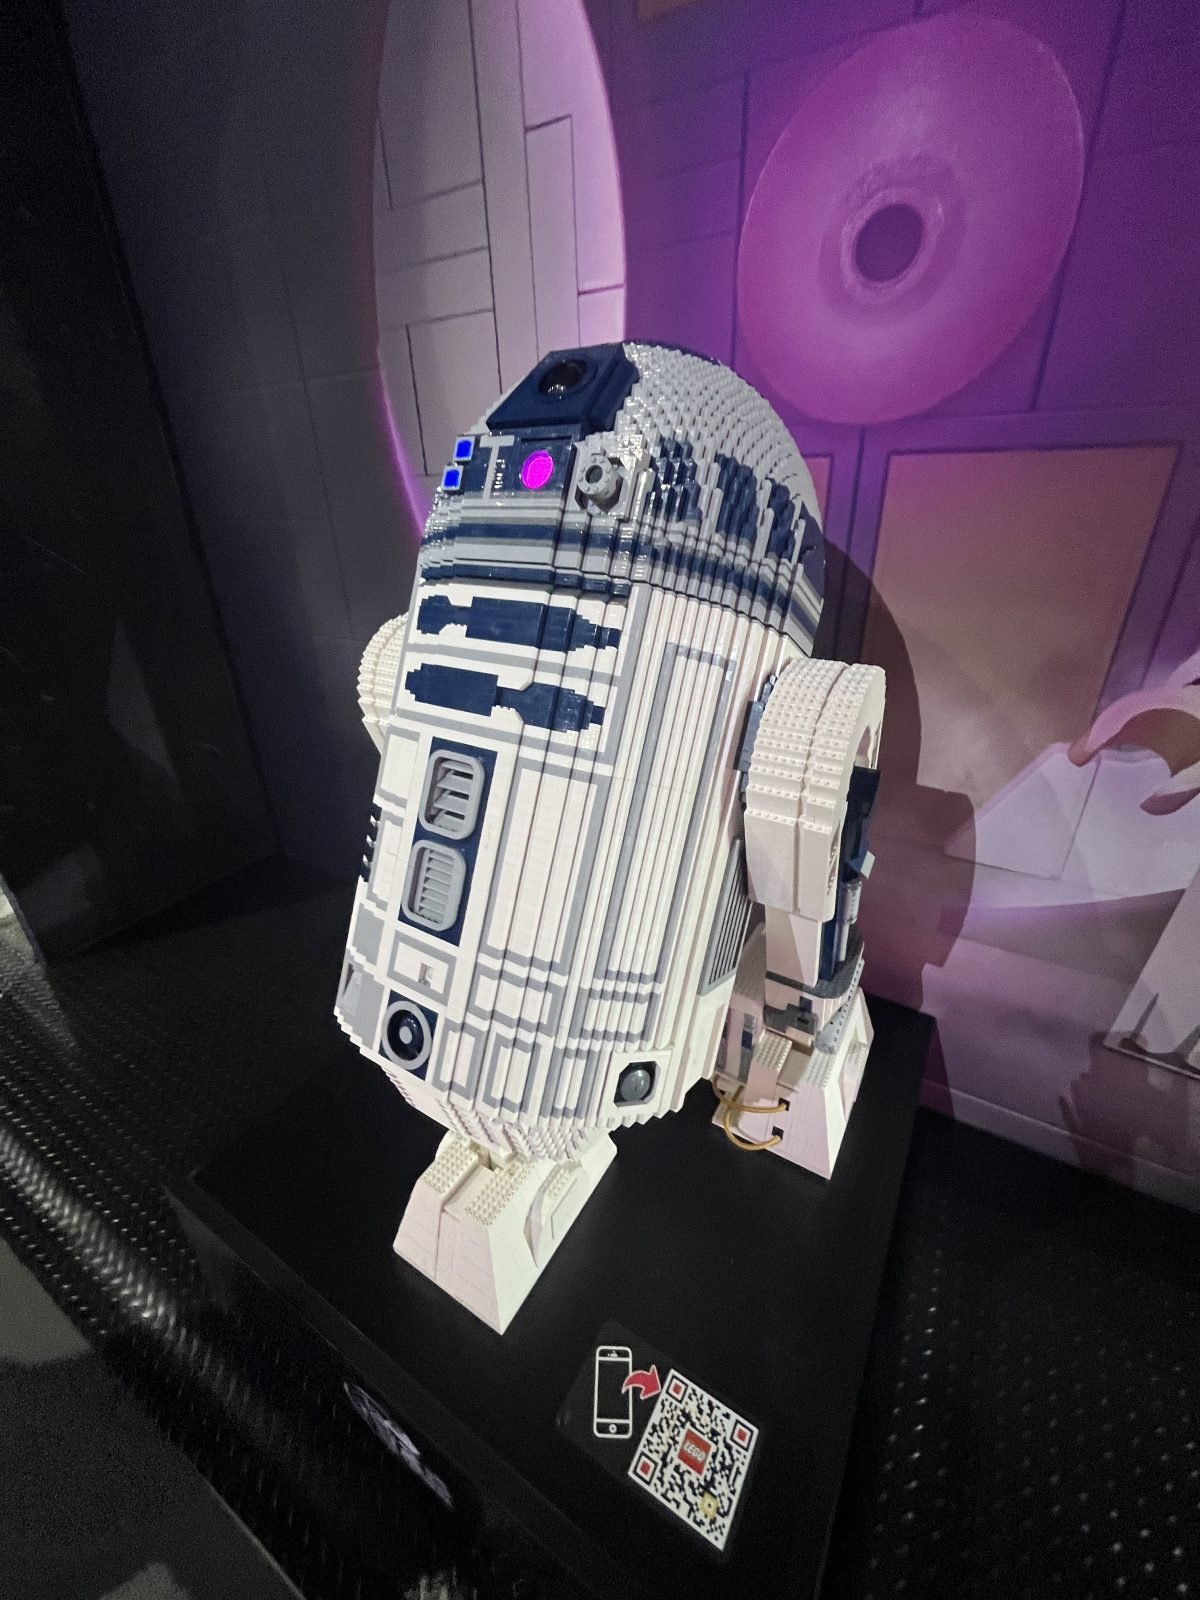 Lego star wars life-size rd-d2 side